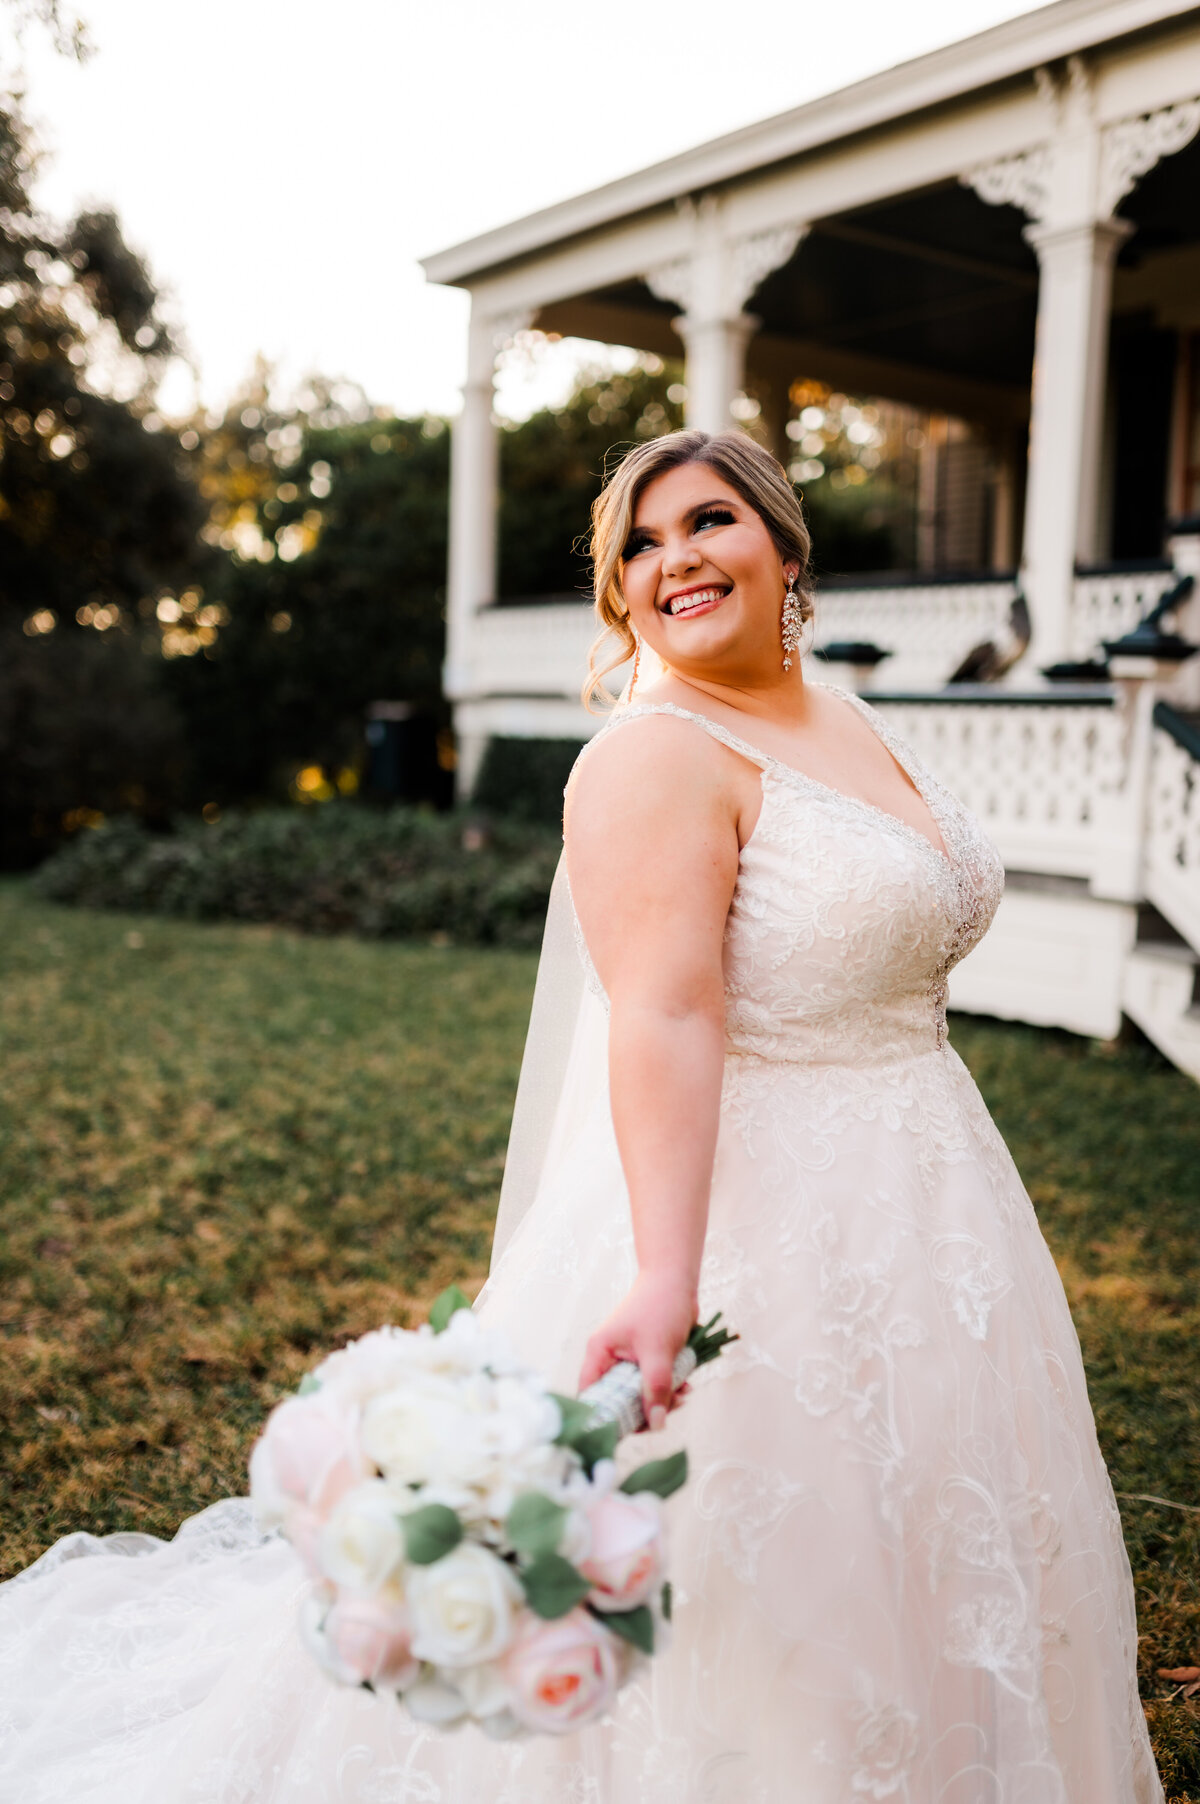 Little Rock wedding photographer captures bride standing outside of her wedding venue on the lawn while the sun sets through the trees in the distance